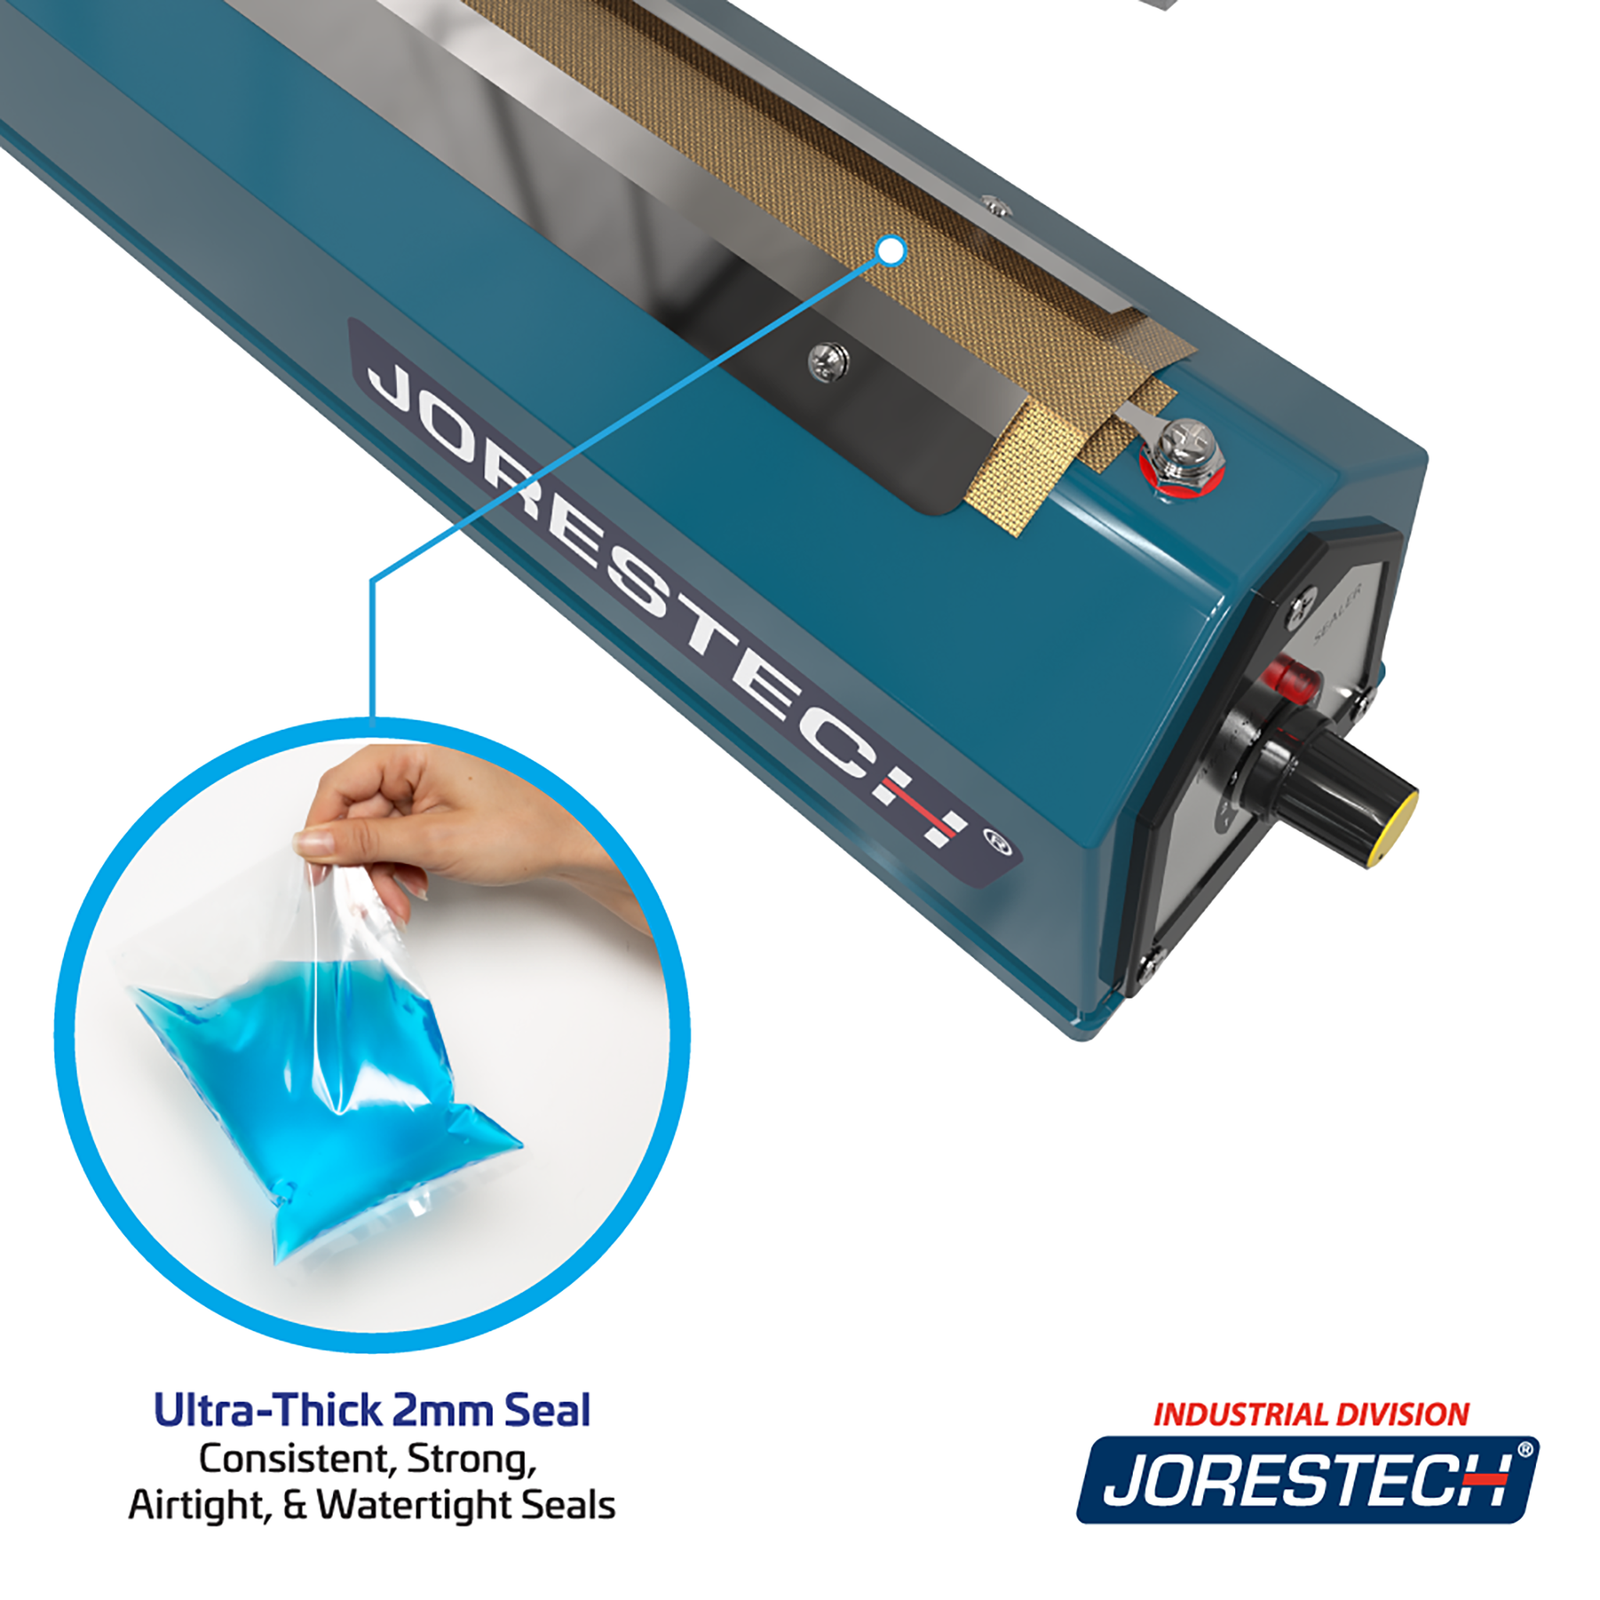 Infographic shows blue JORESTECH manual impulse sealer over white background. The image is zoomed in showing the sealing element. Highlighted feature reads 